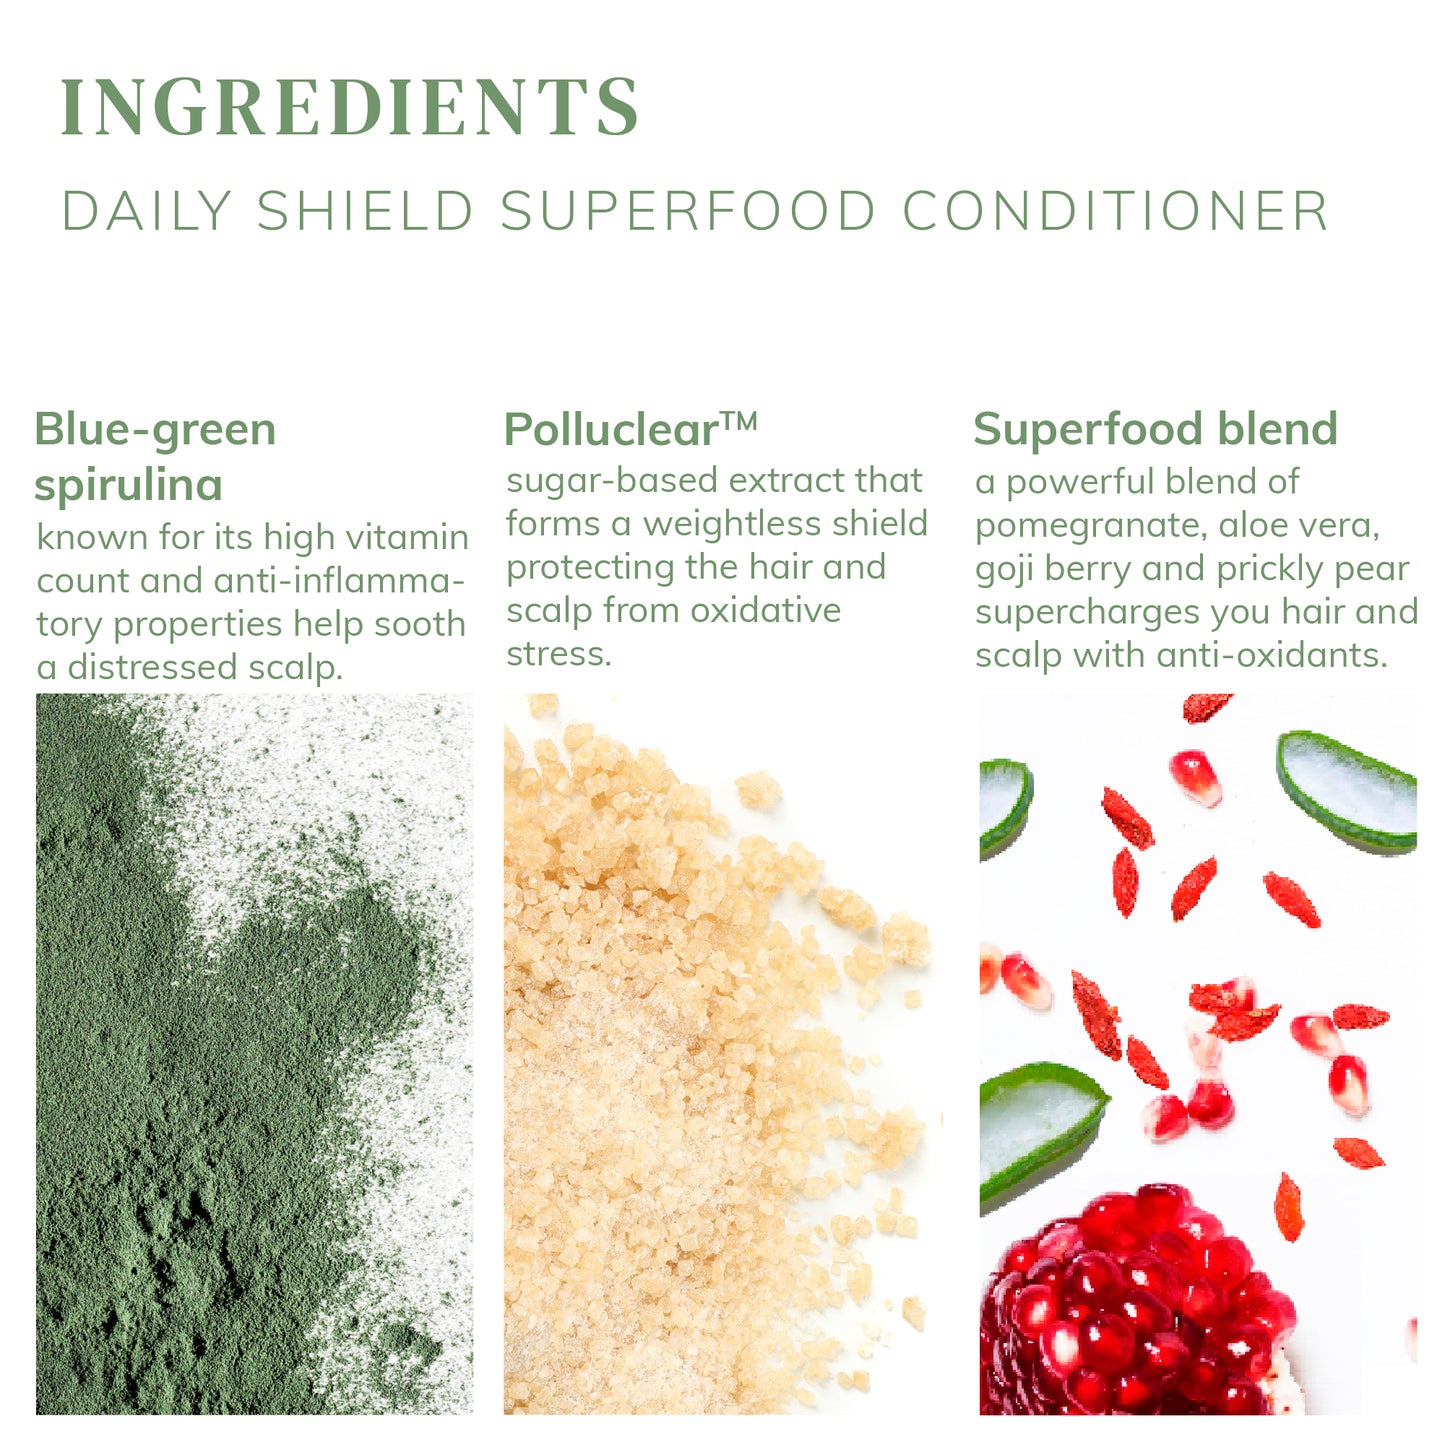 Daily Shield Superfood Conditioner